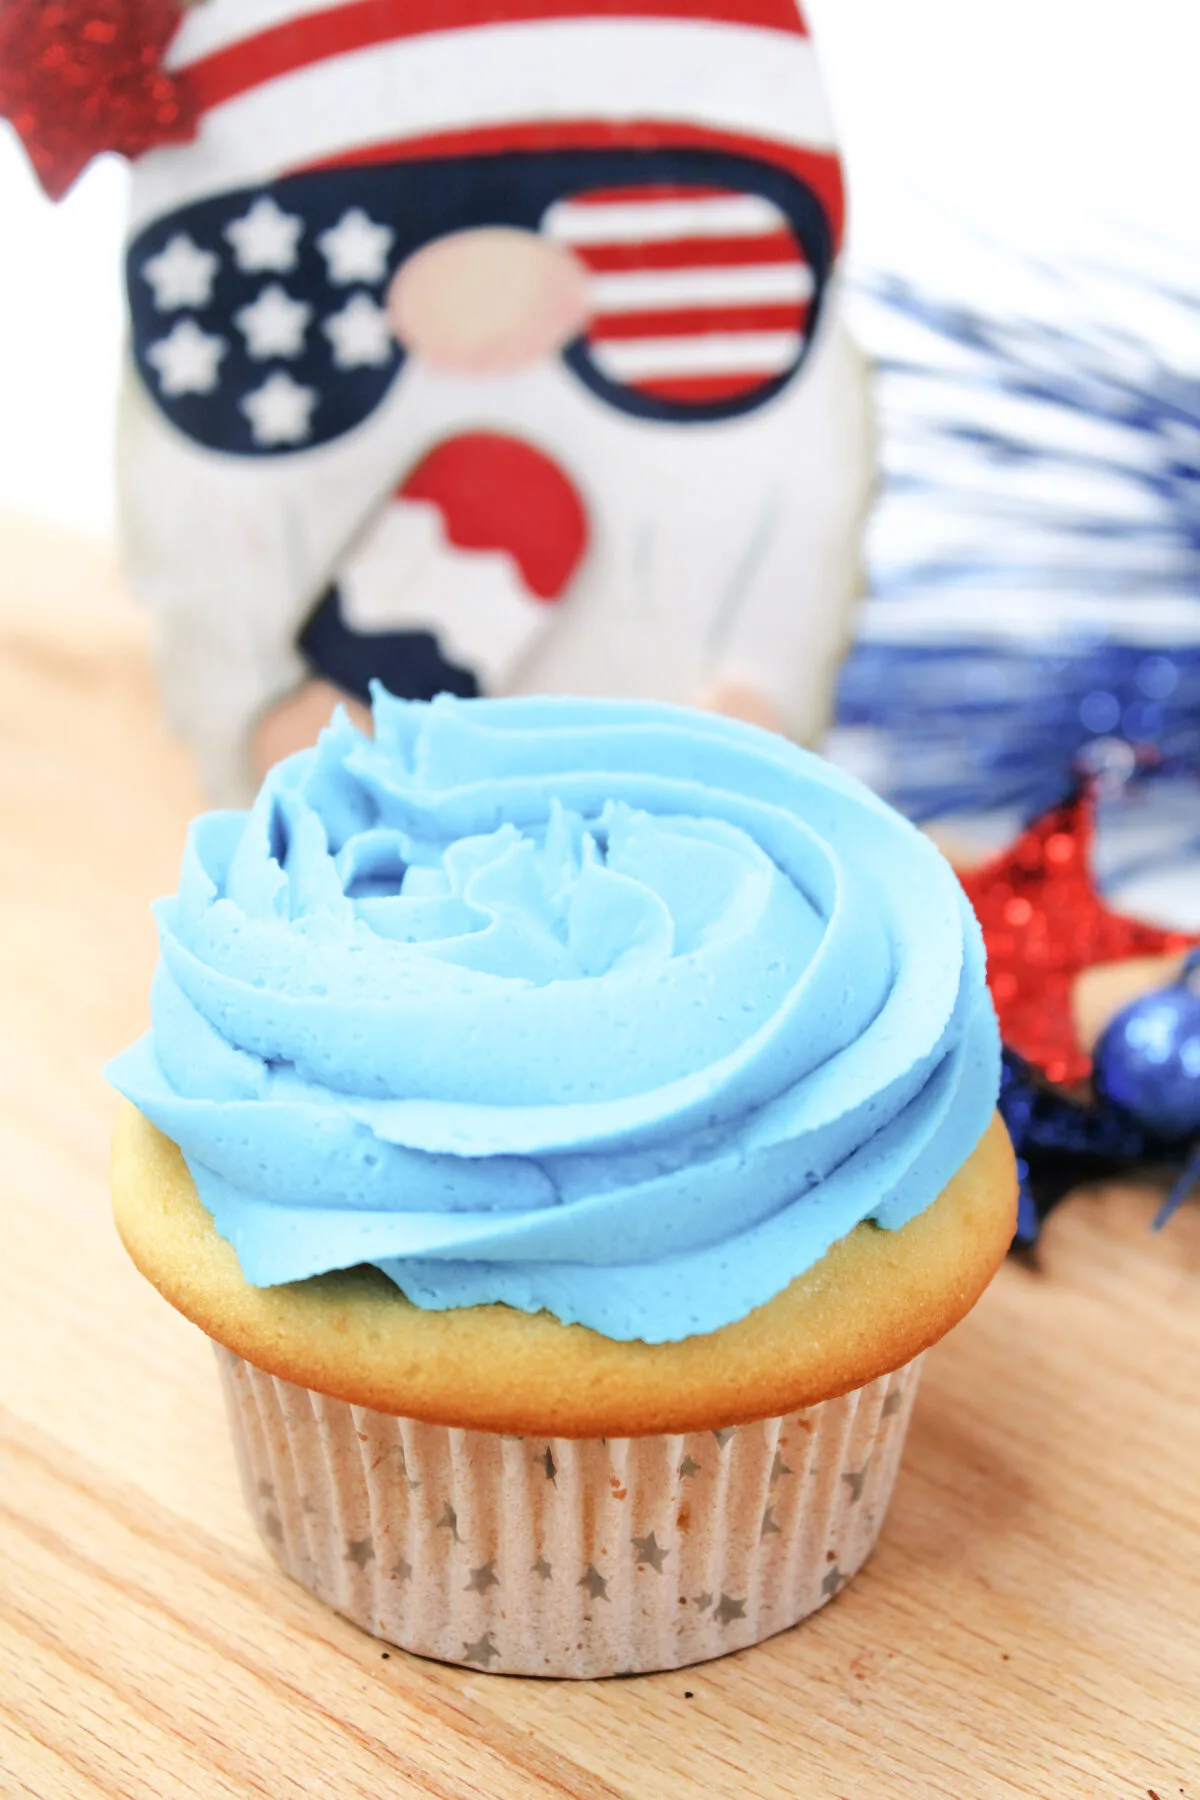 Blue frosting piped onto the top of a cupcake.